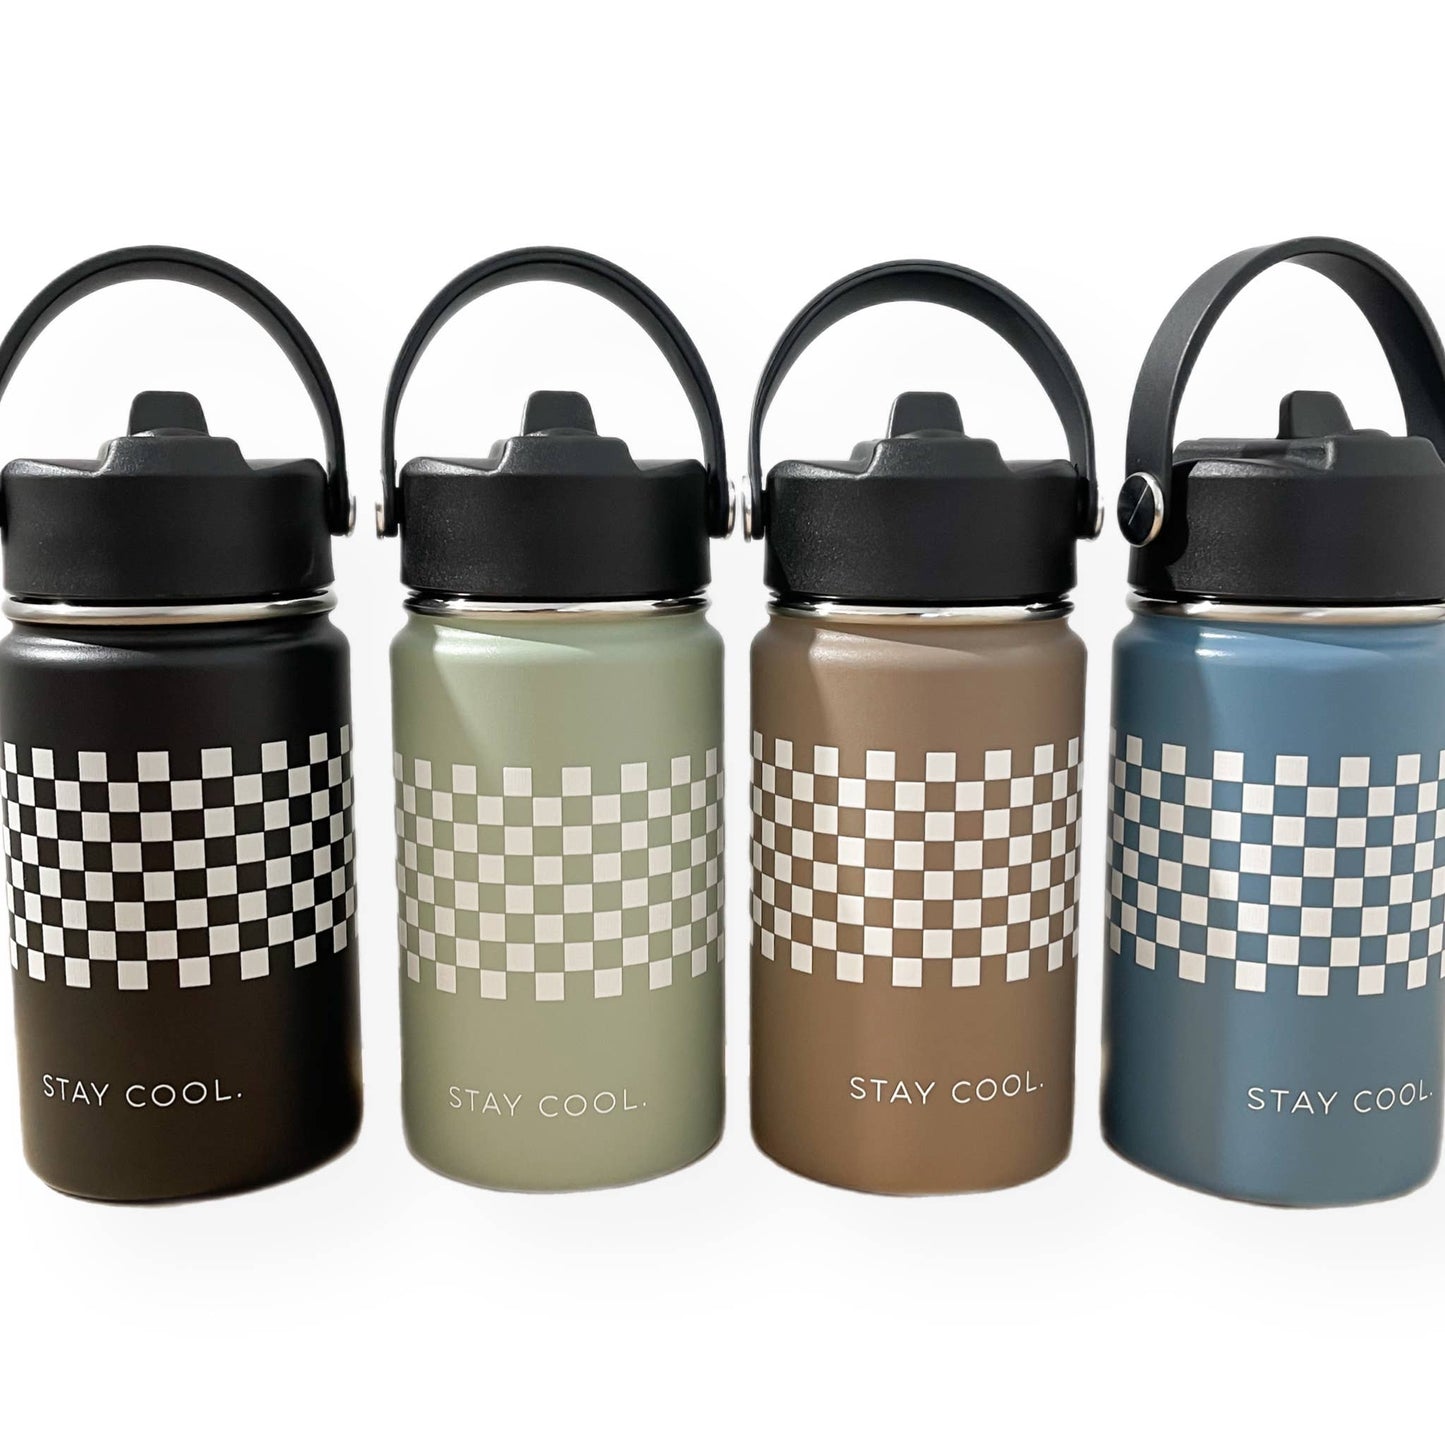 Insulated Cups: Black